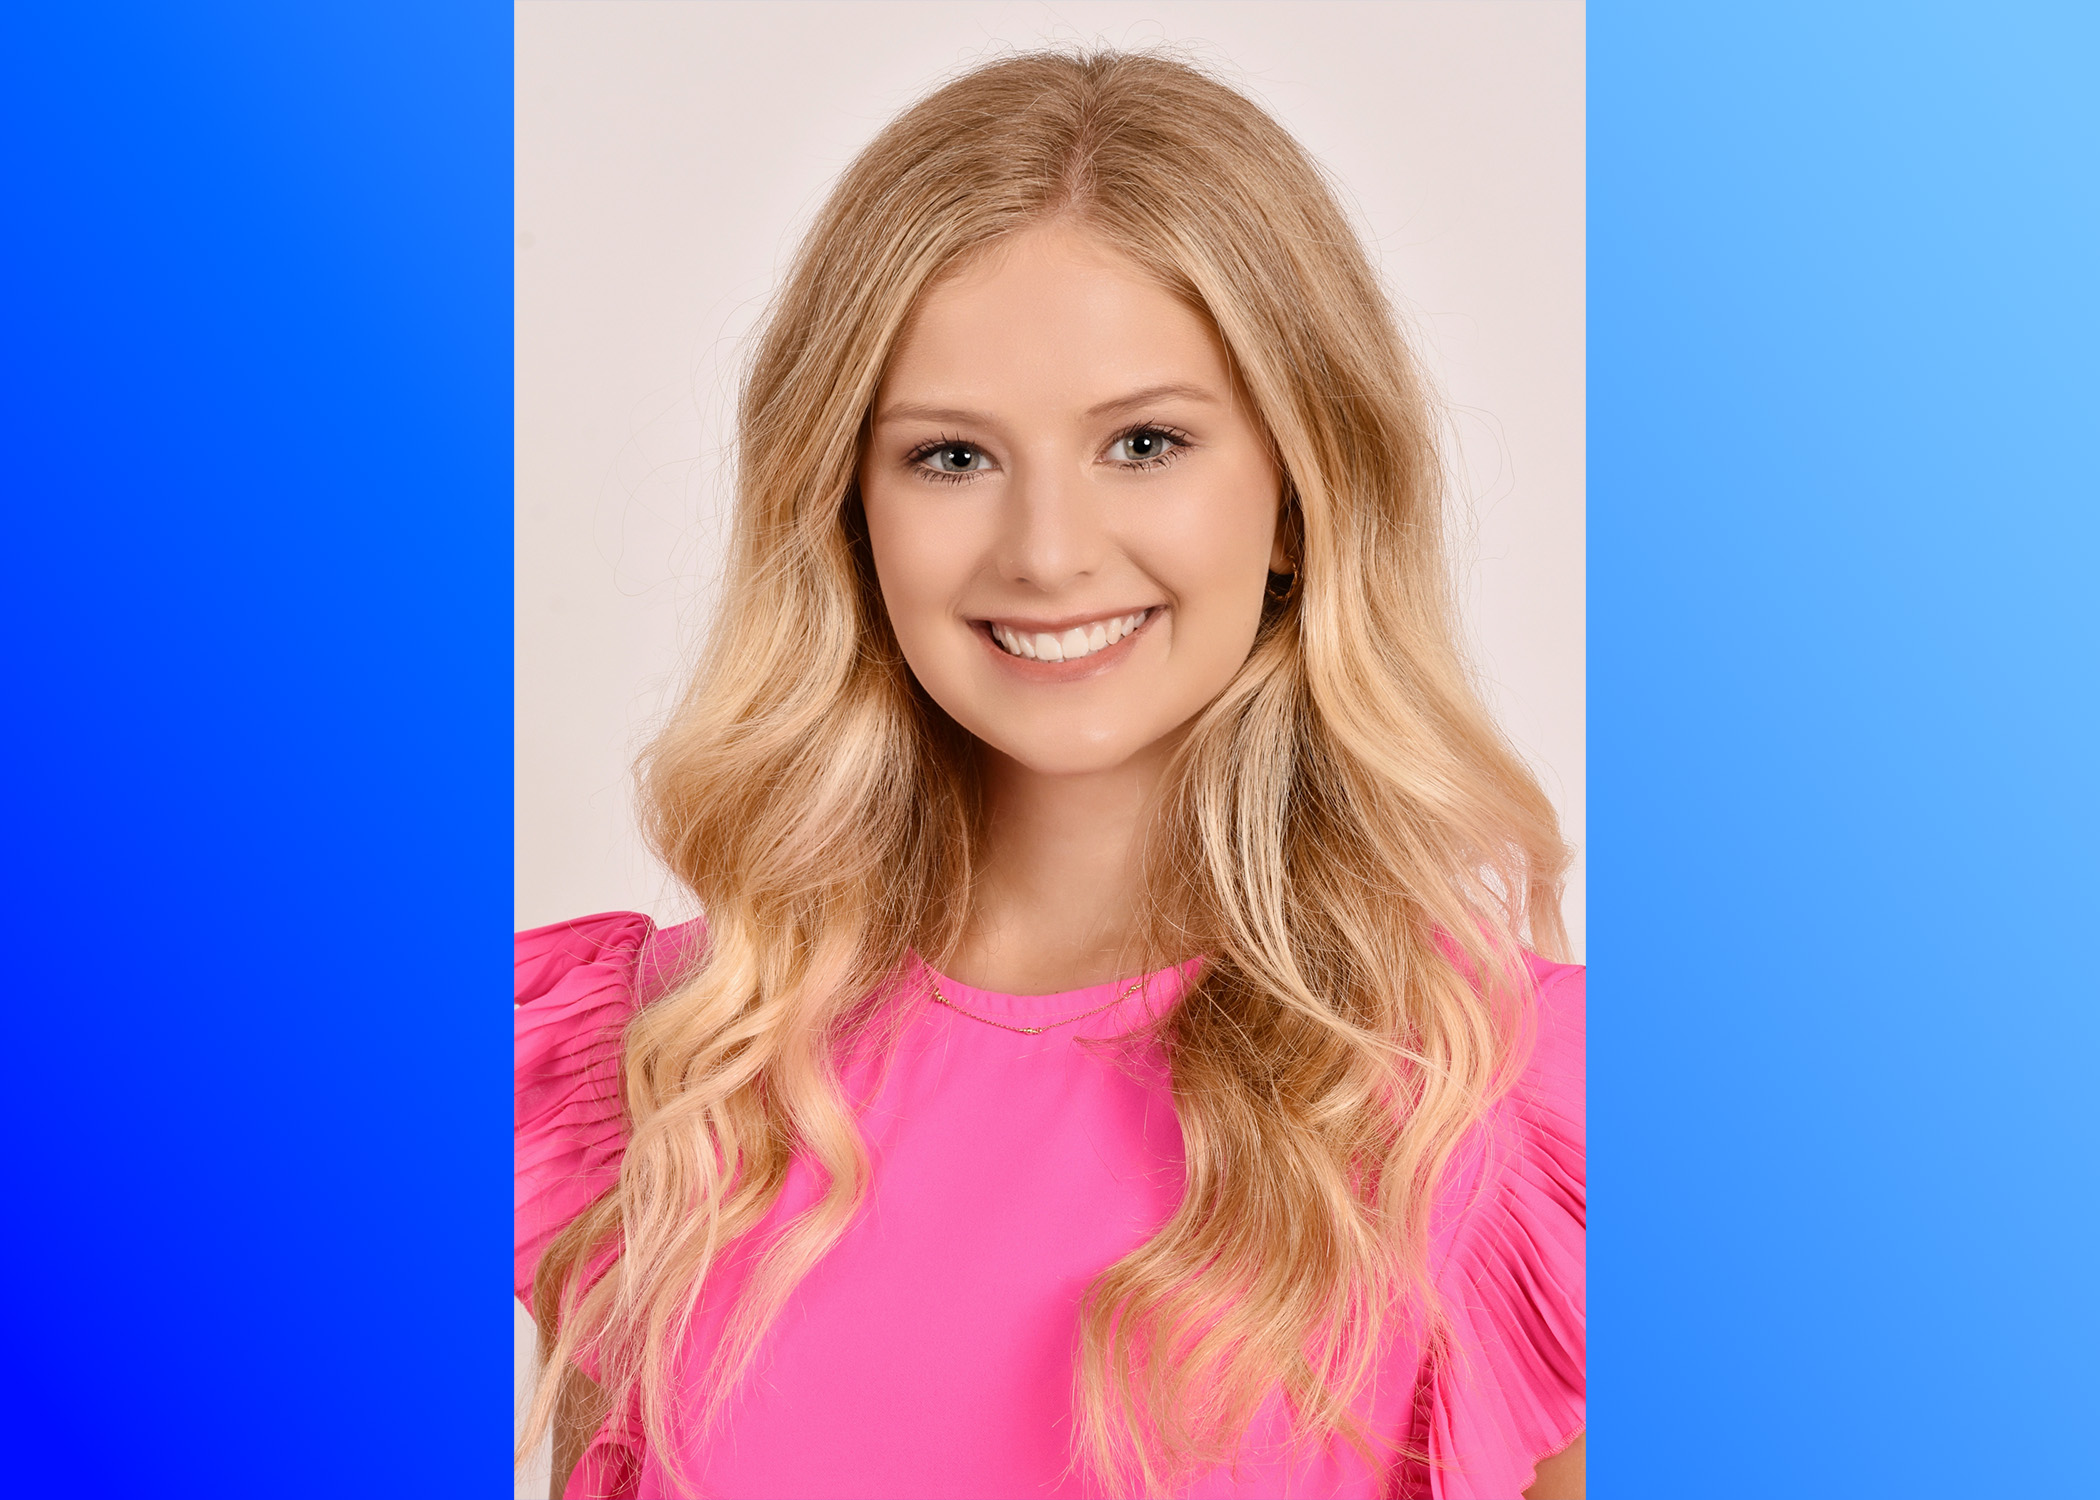 Trussville teen to participate in upcoming Distinguished Young Women of Alabama Program